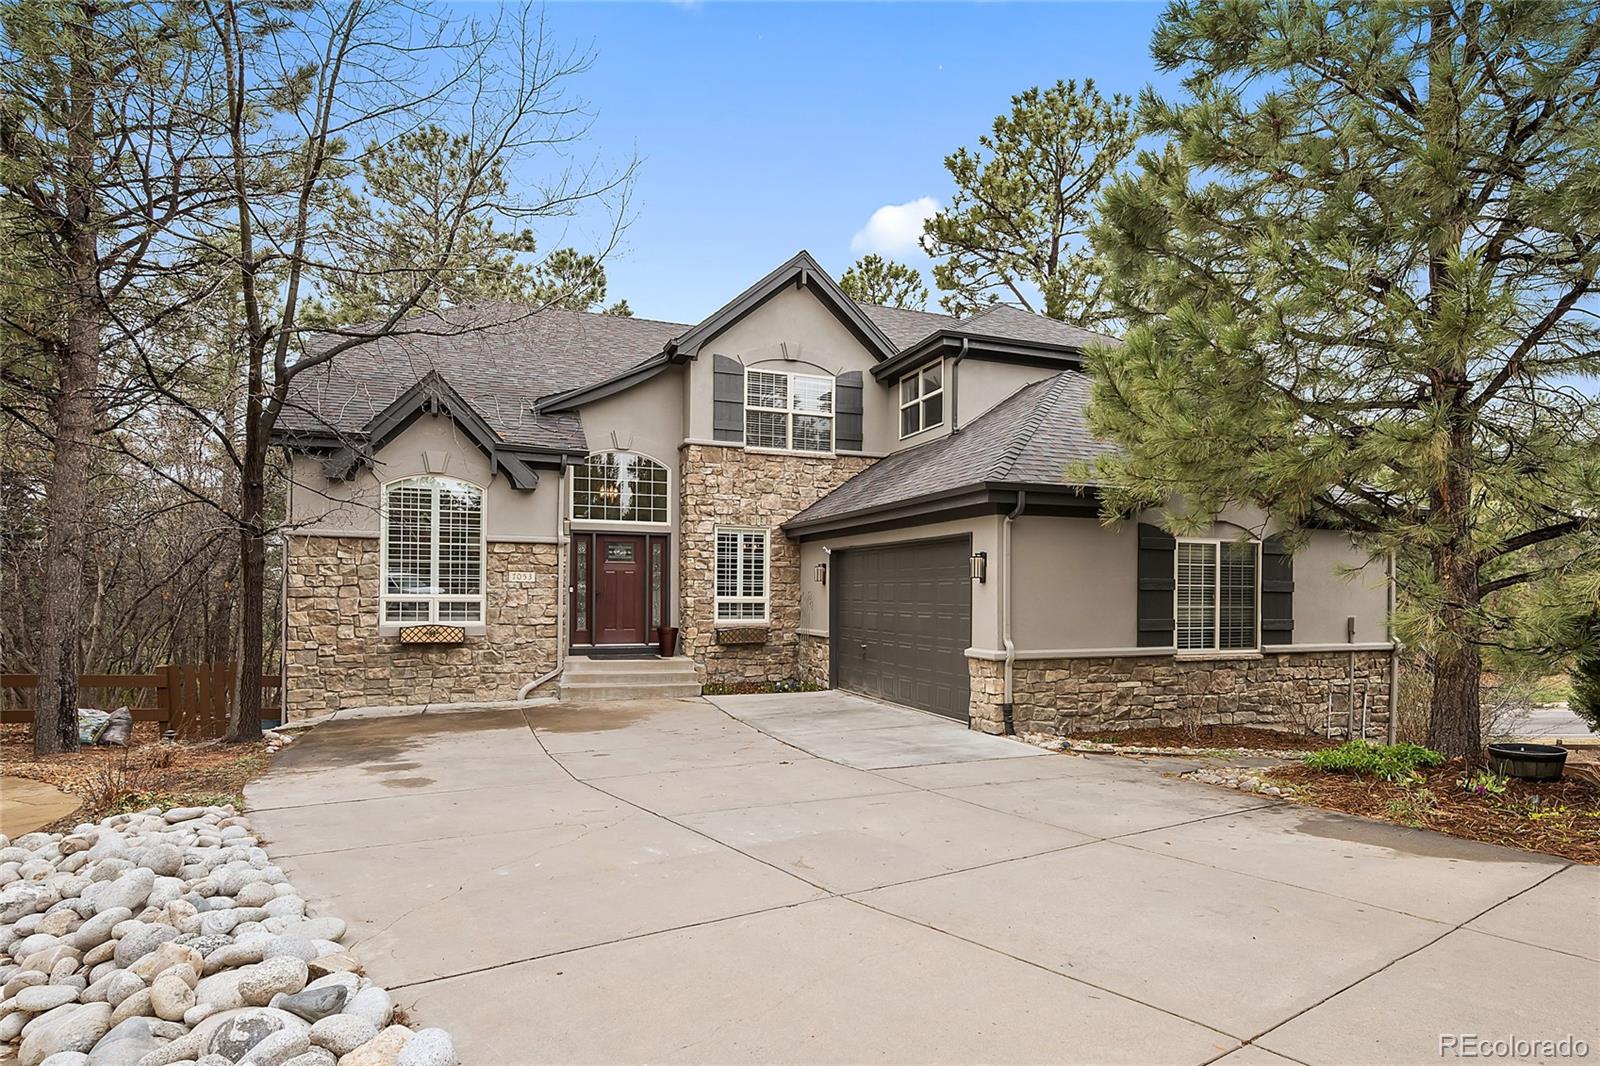 7053  Timbercrest Way, castle pines MLS: 6126443 Beds: 6 Baths: 4 Price: $1,250,000